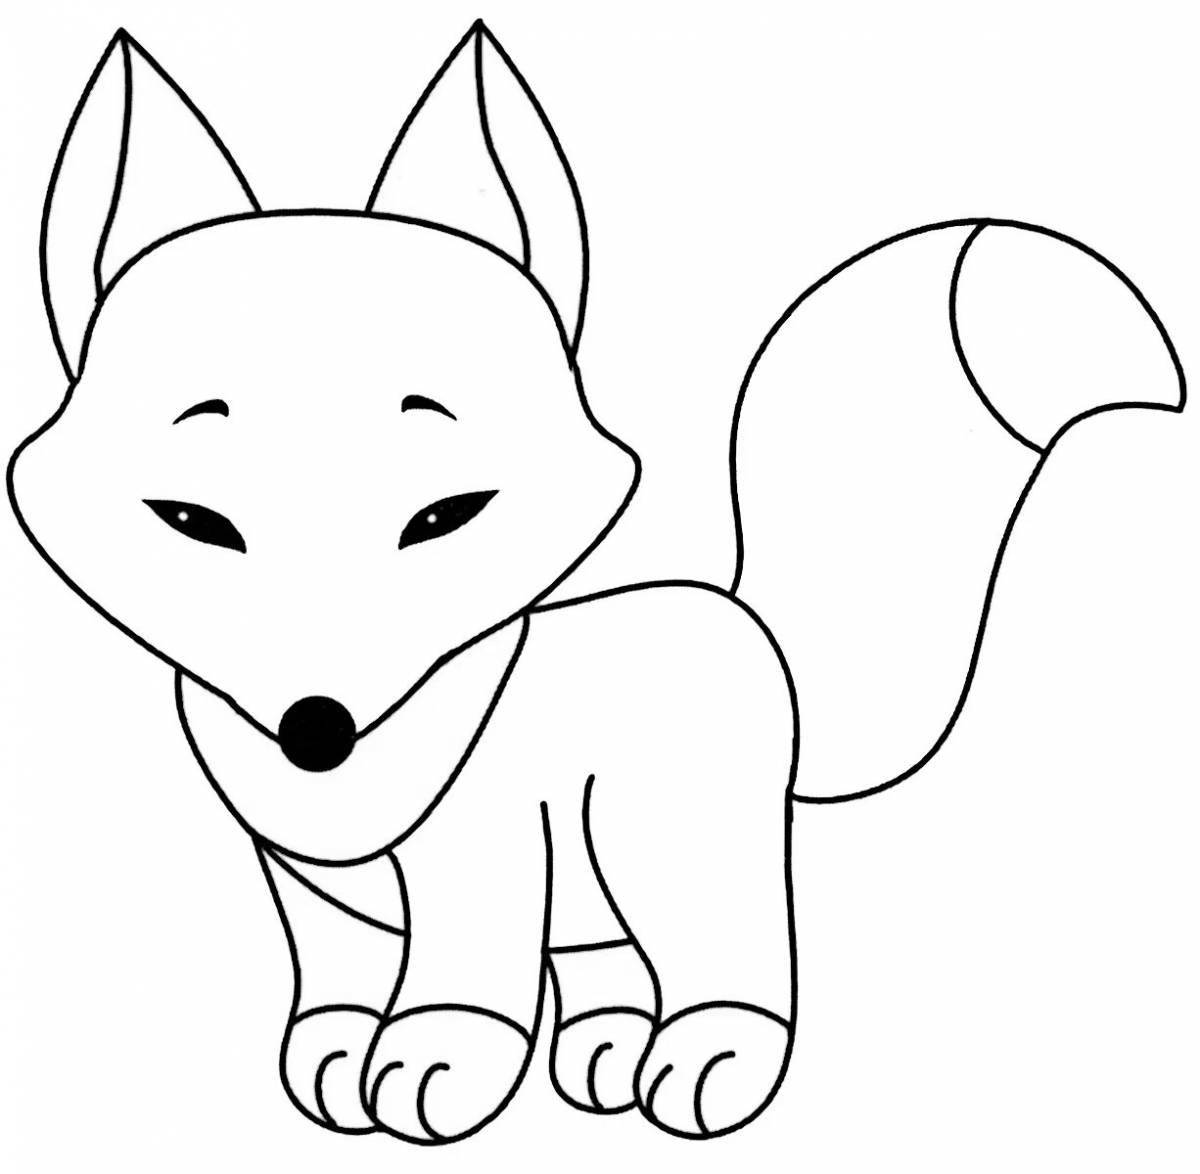 Colorful fox coloring page for kids